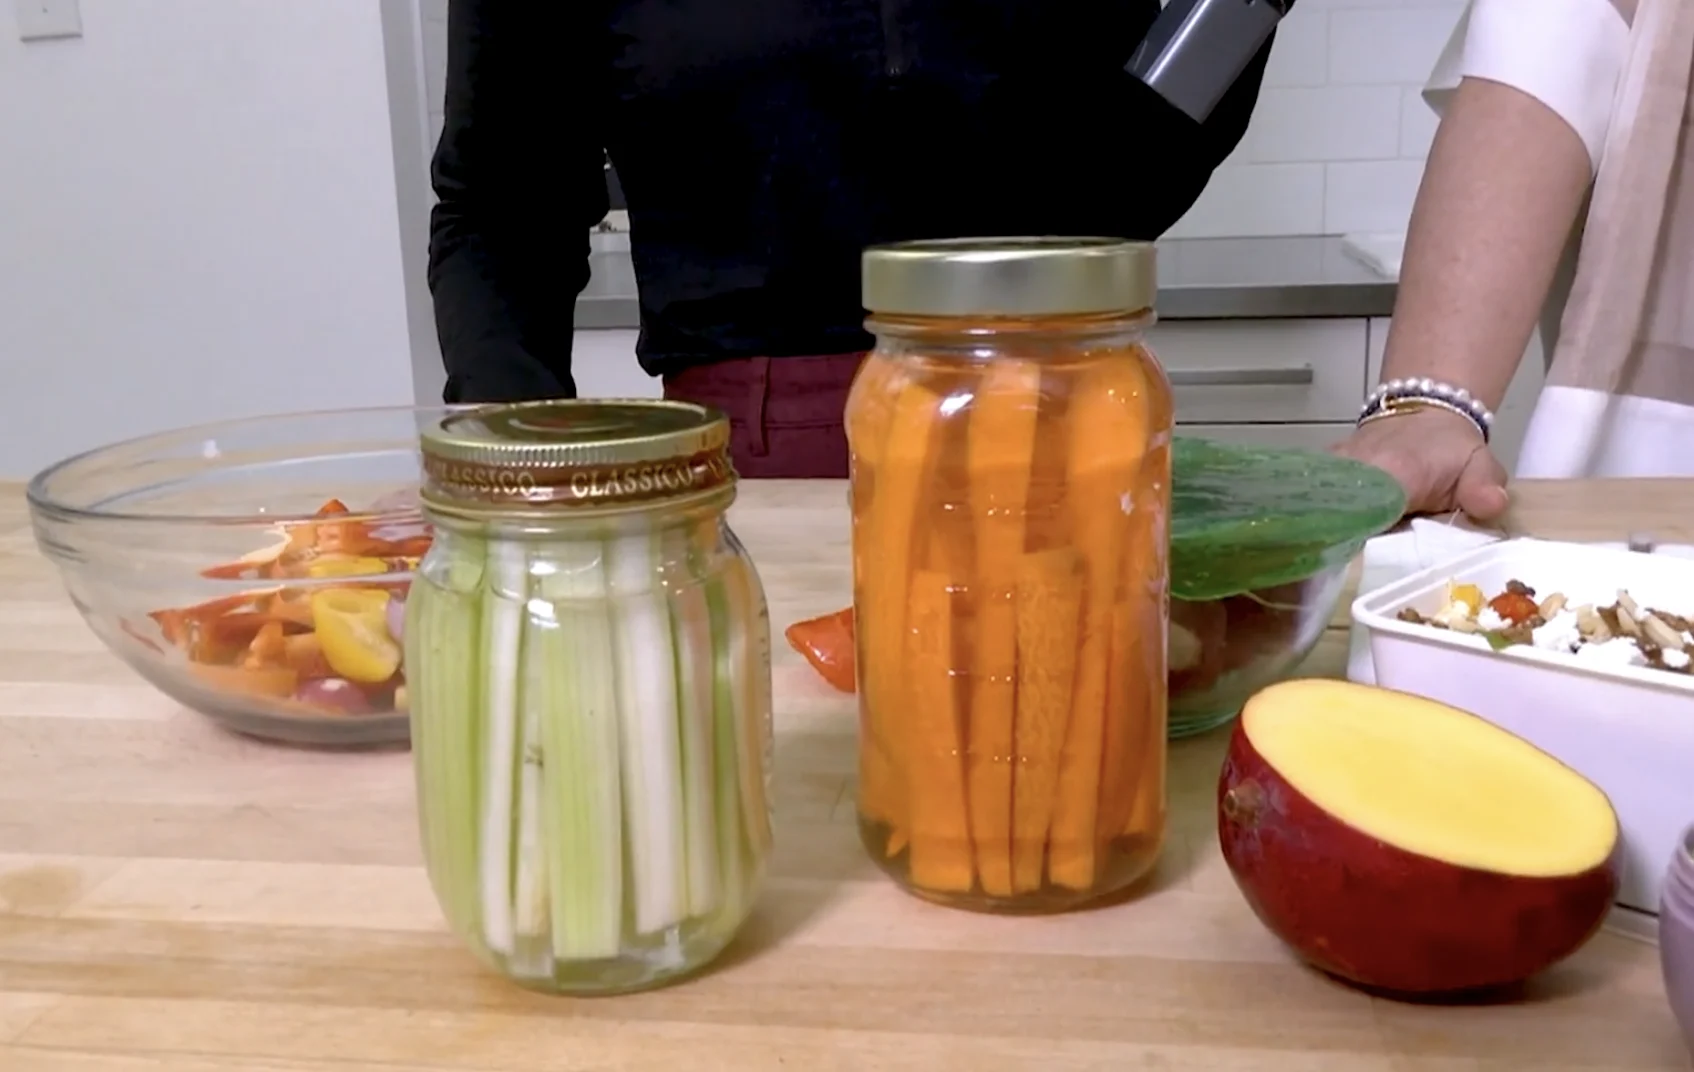 Victoria: Pickling vegetables to extend shelf life